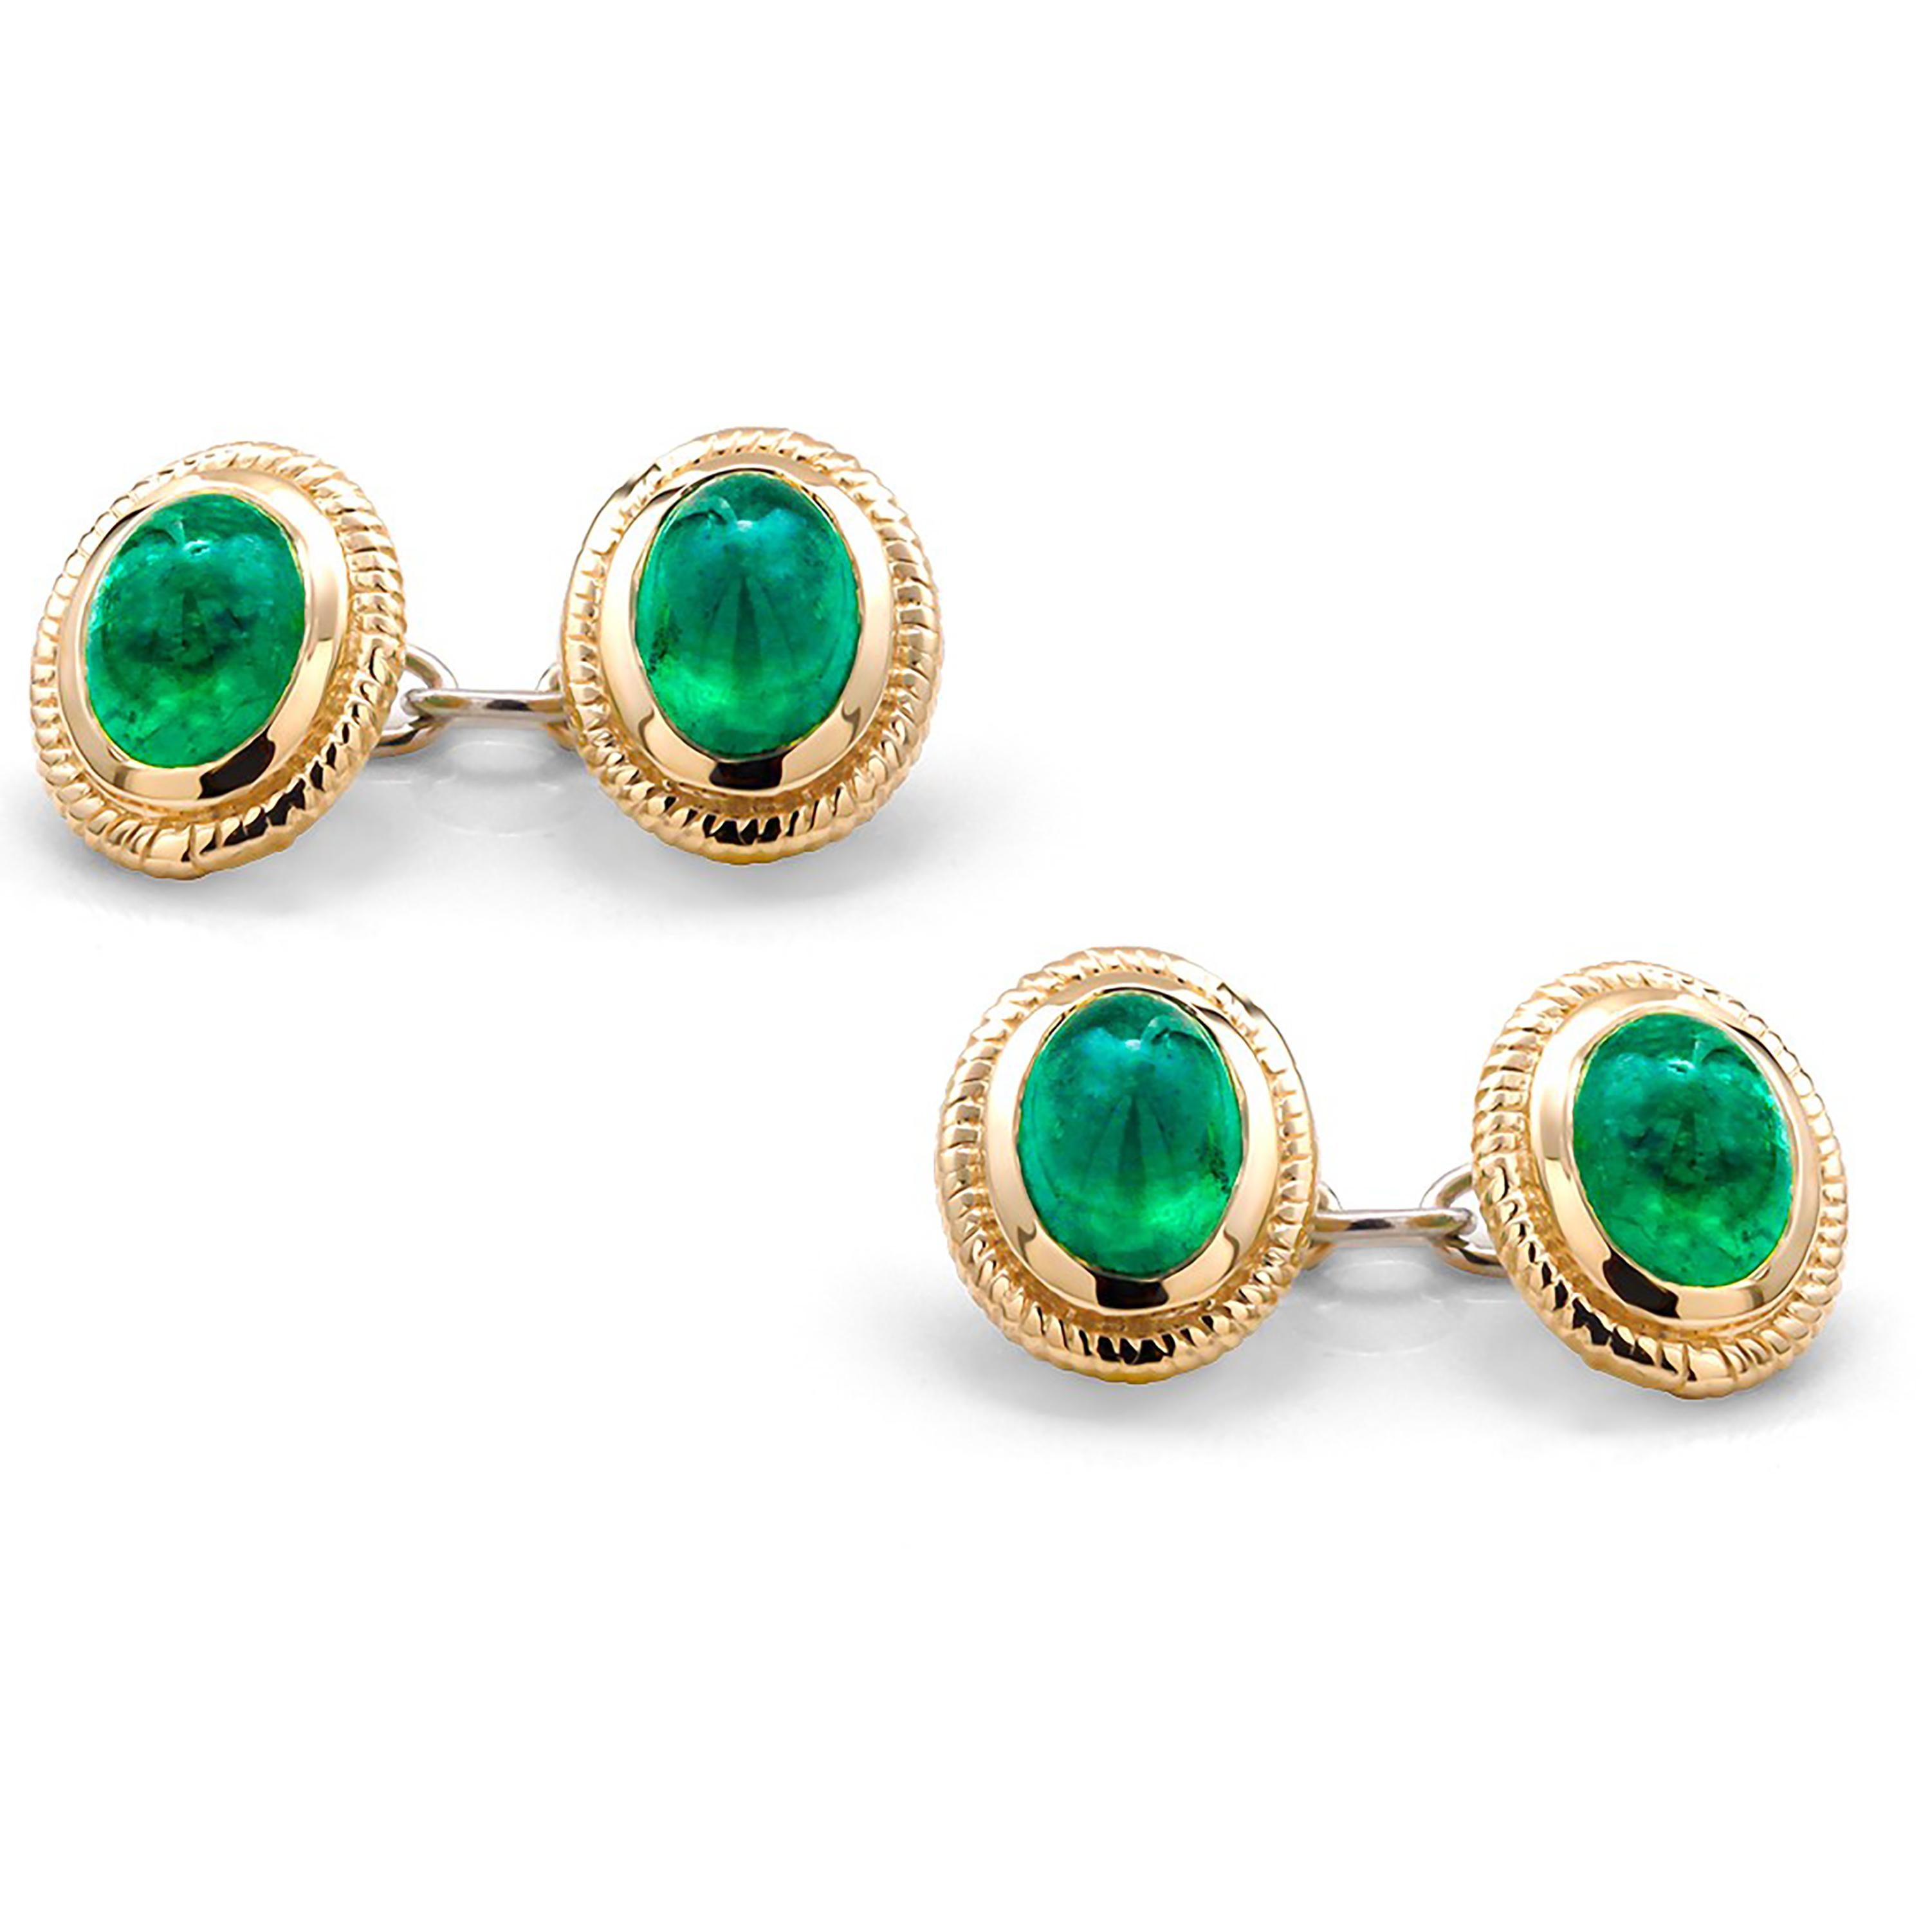 14 karats yellow gold fabulous pair of matching men’s double-sided chain link cufflinks
Four matching cabochon emeralds weighing 4.57 carats
Cufflinks measuring 0.35